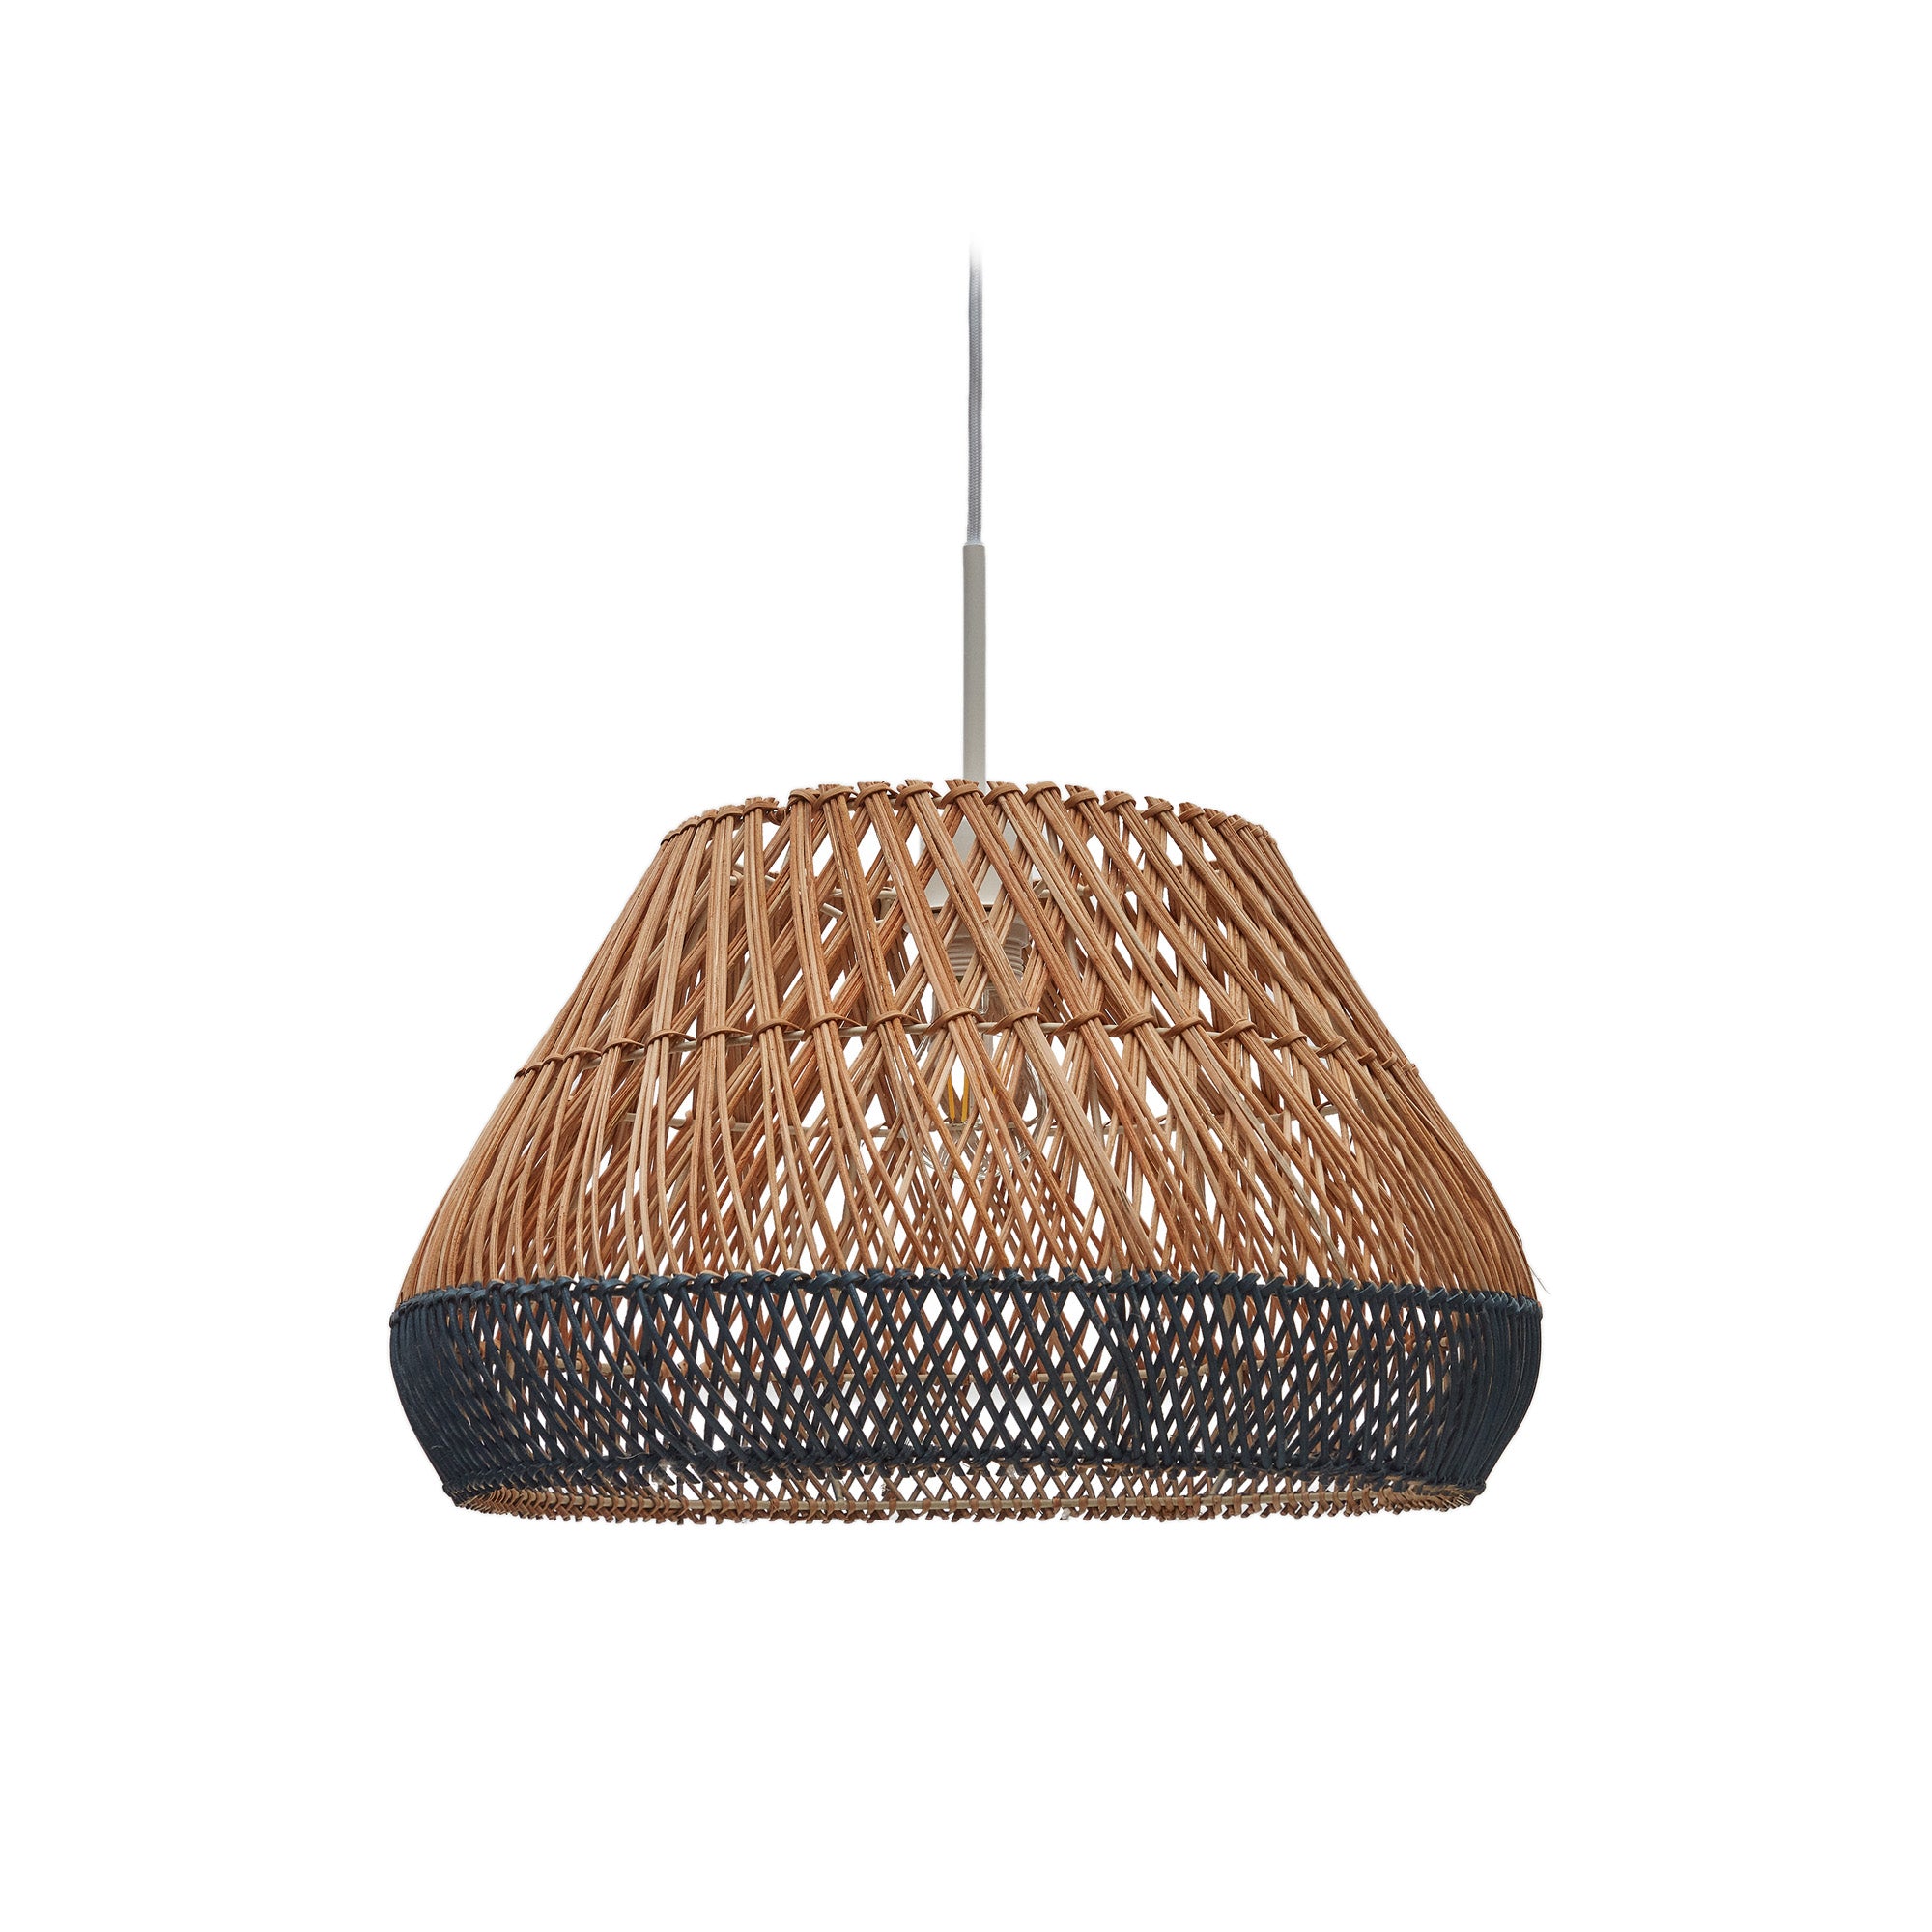 Daro rattan ceiling lamp shade with a natural and blue finish, Ø 45 cm